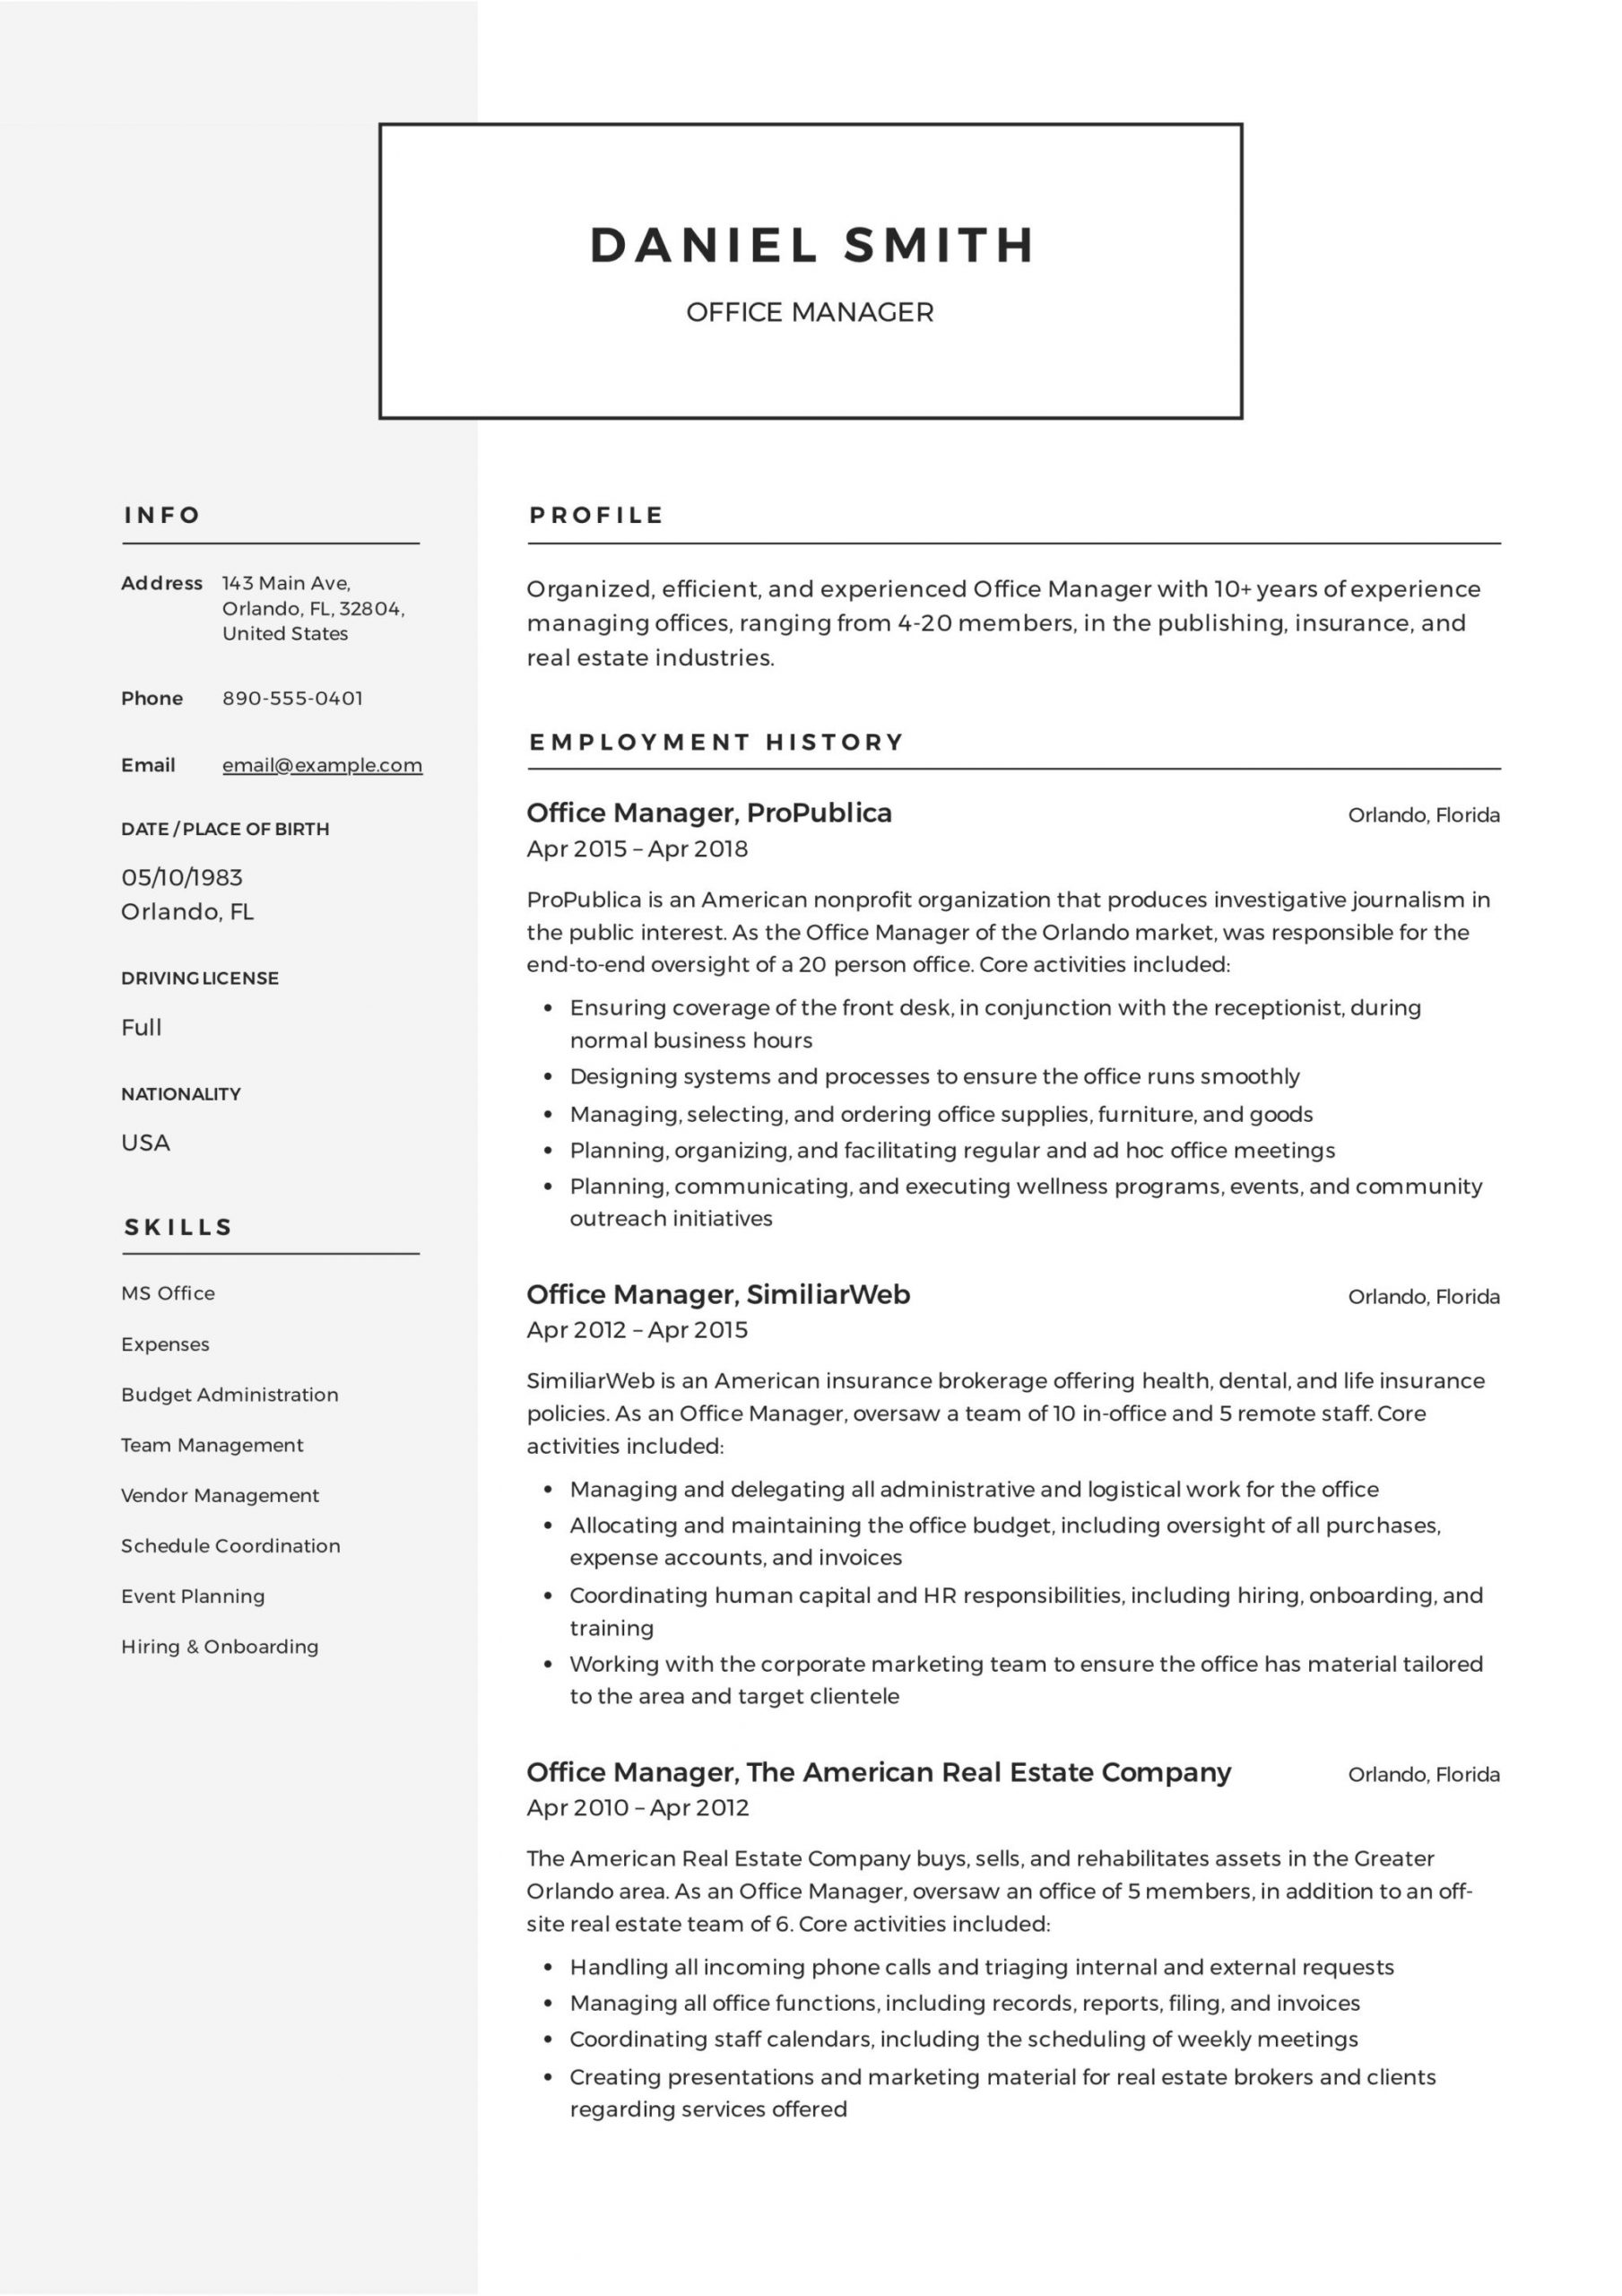 Law Firm Office Manager Resume Sample Post Office Manager Resume September 2021